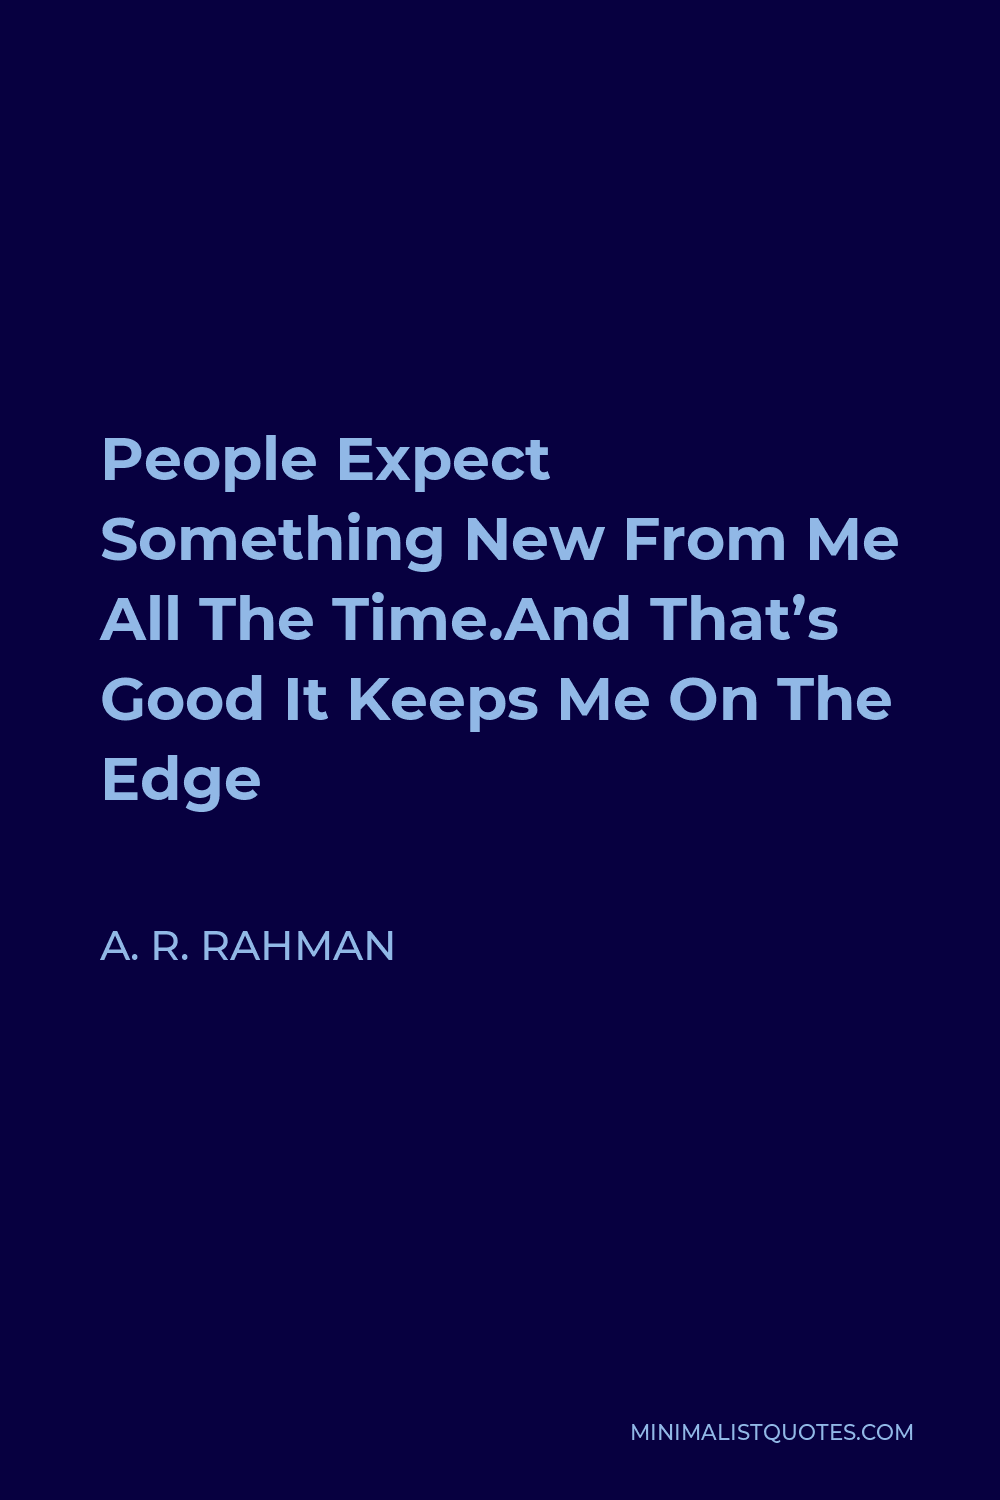 A. R. Rahman Quote - People Expect Something New From Me All The Time.And That’s Good It Keeps Me On The Edge